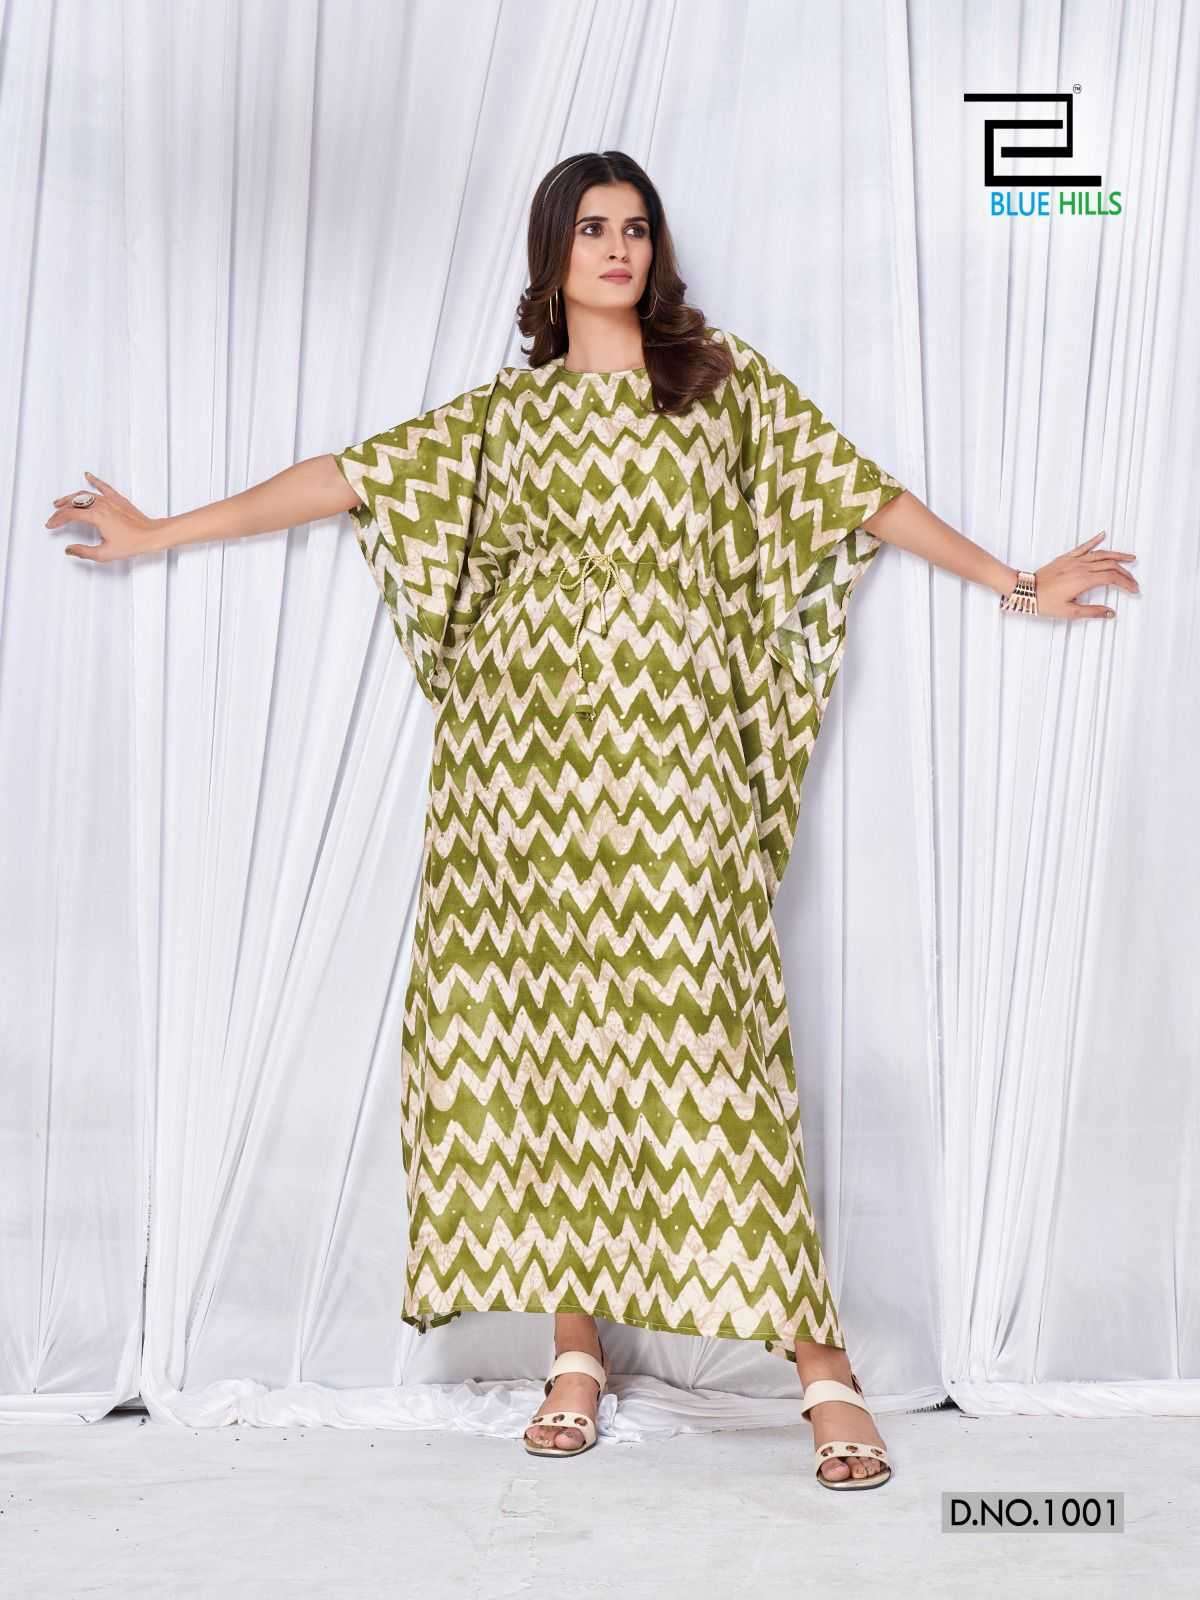 GLORY SERIES 1001 TO 1005 BY BLUE HILLS DESIGNER WITH PRINTED RAYON KAFTAN ARE AVAILABLE AT WHOLESALE PRICE